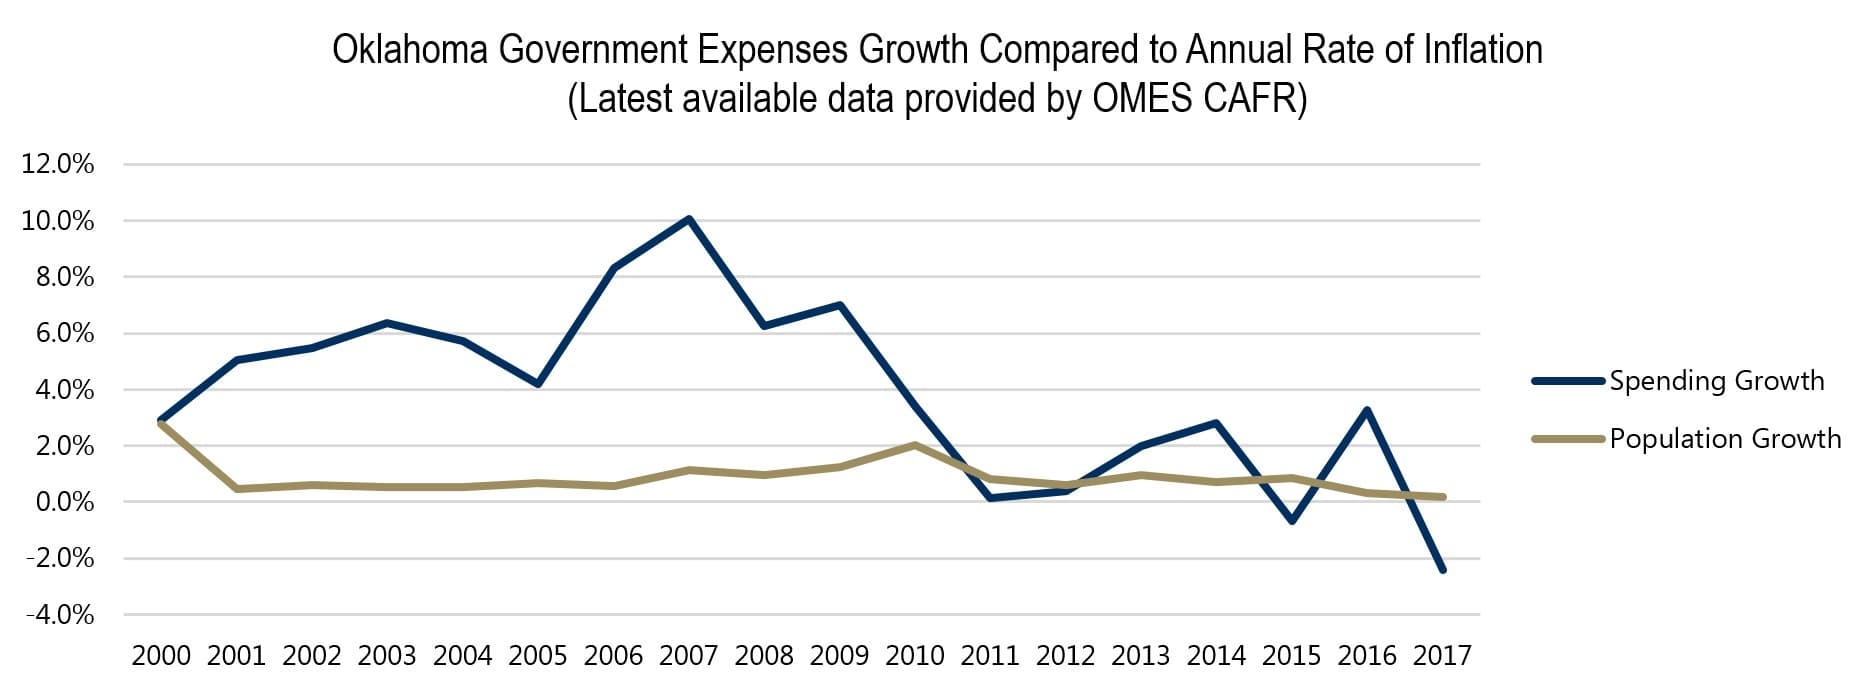 Oklahoma Government Expenses Growth Compared to Annual Rate of Inflation